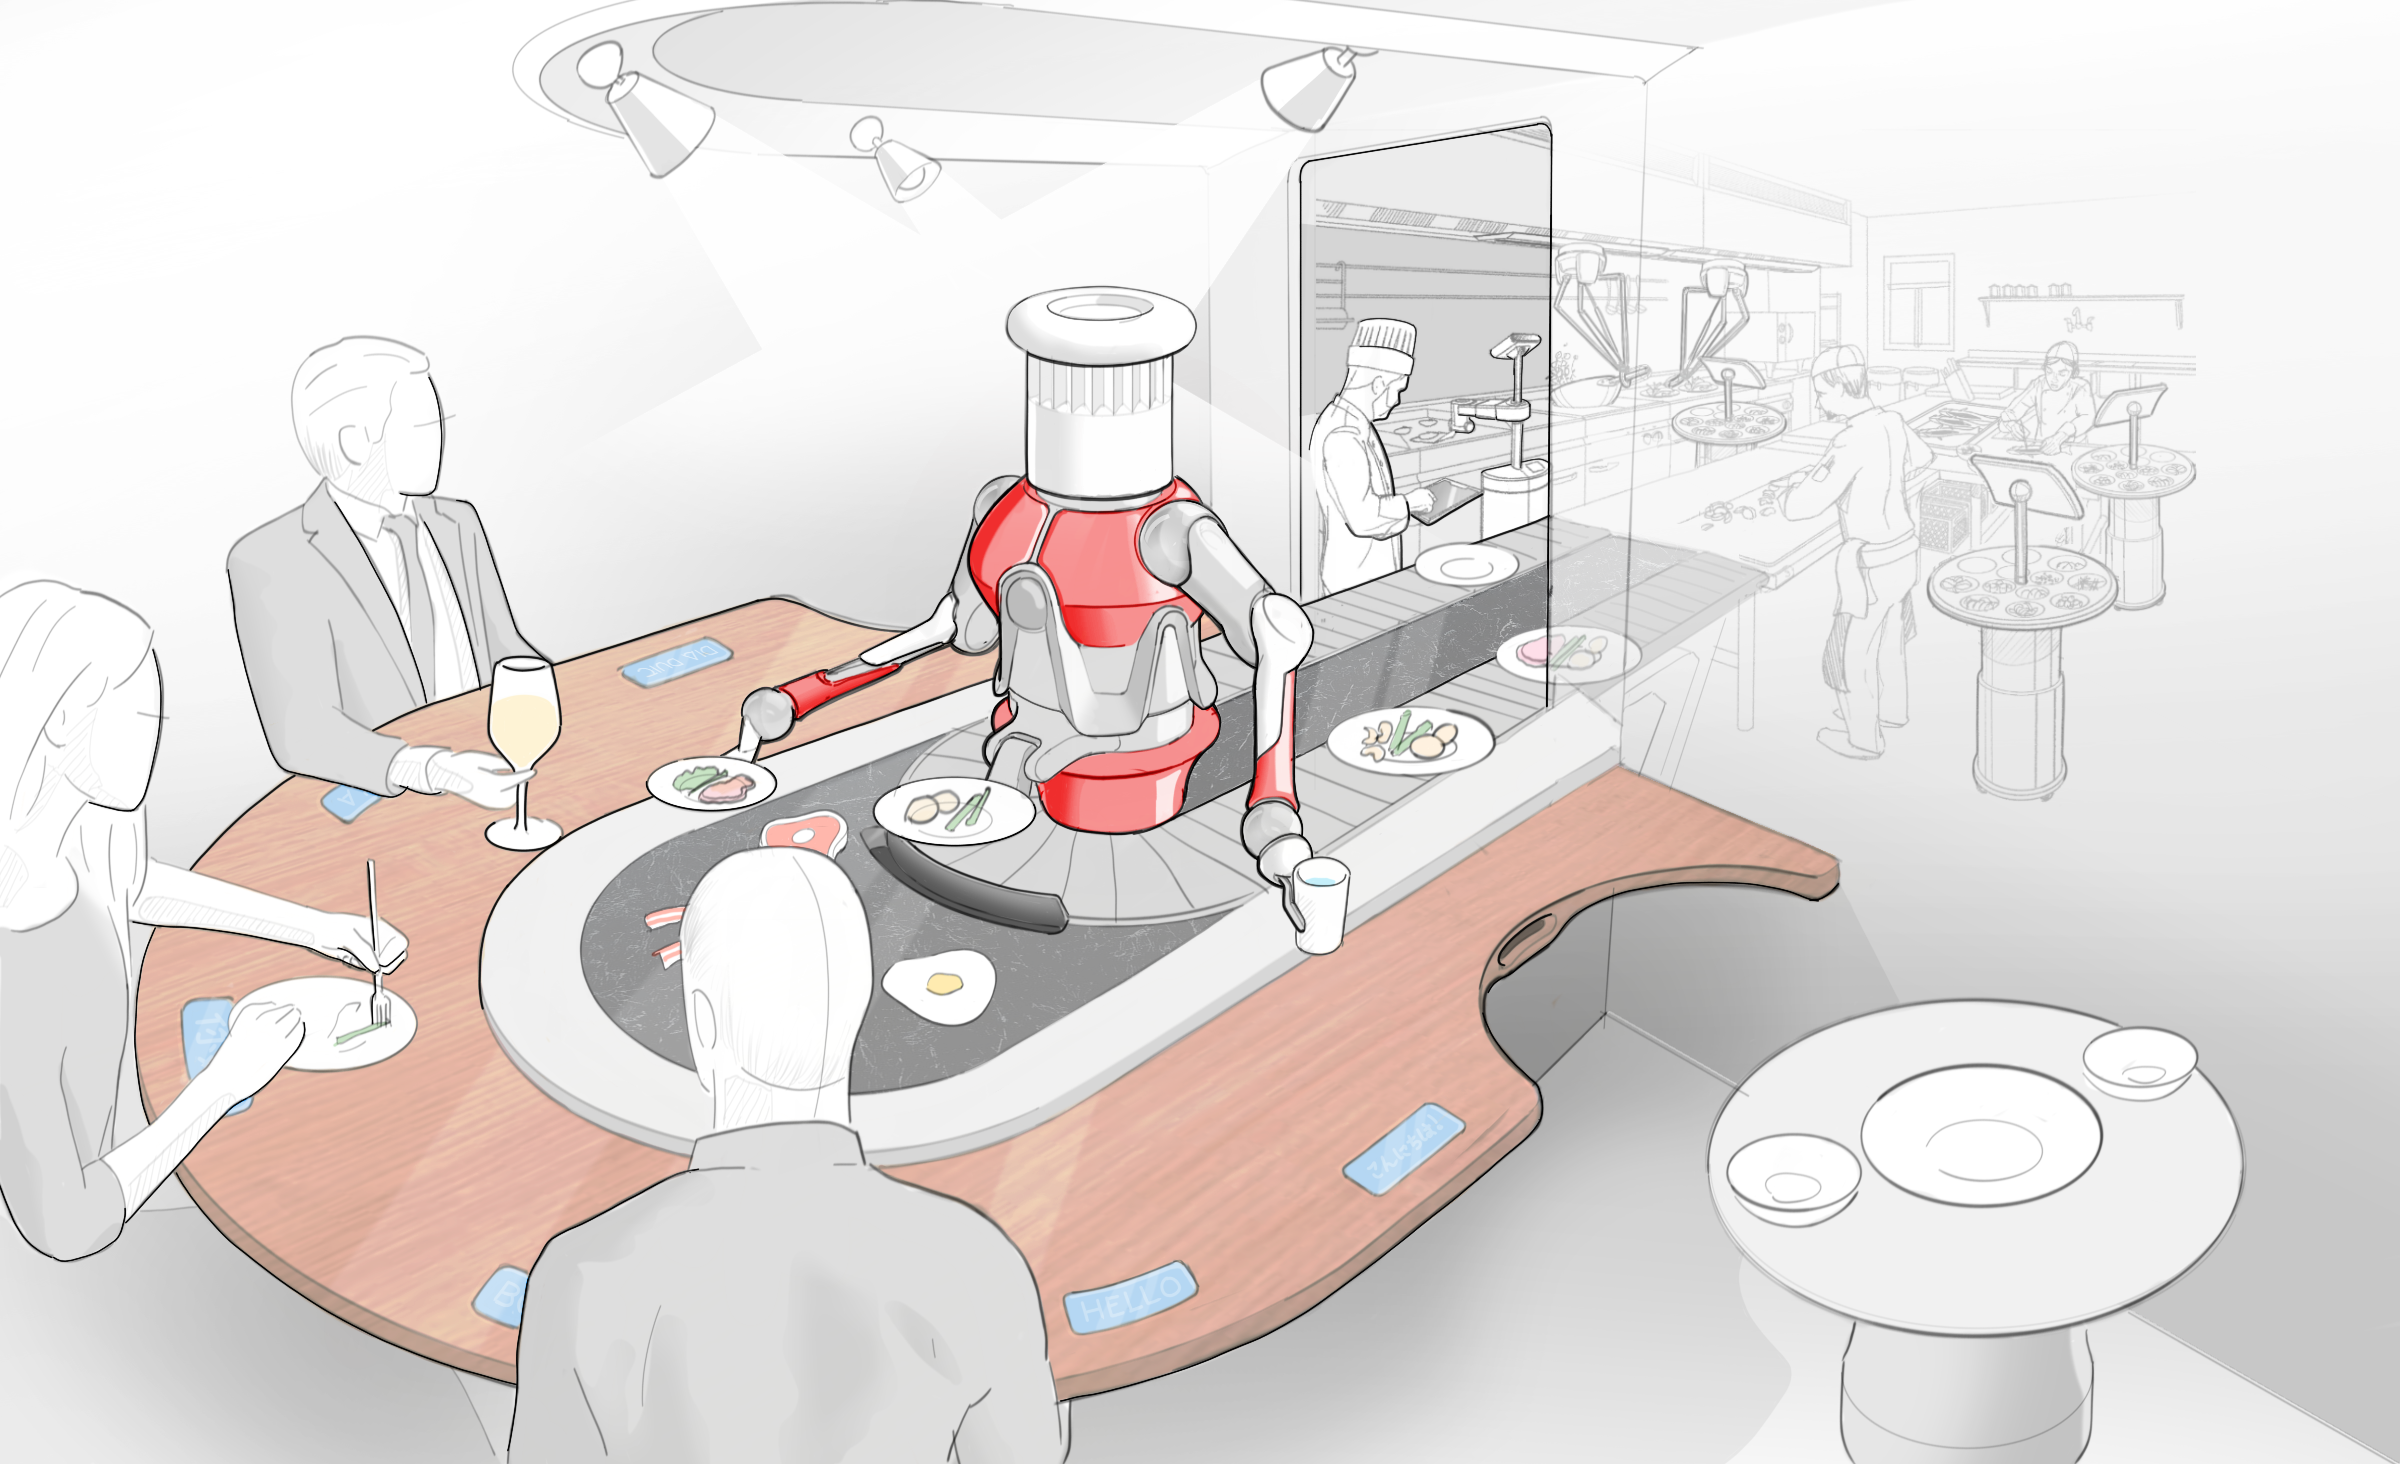 Get the white paper: “Cobots and The Future of Food: 6 considerations for cobot design”